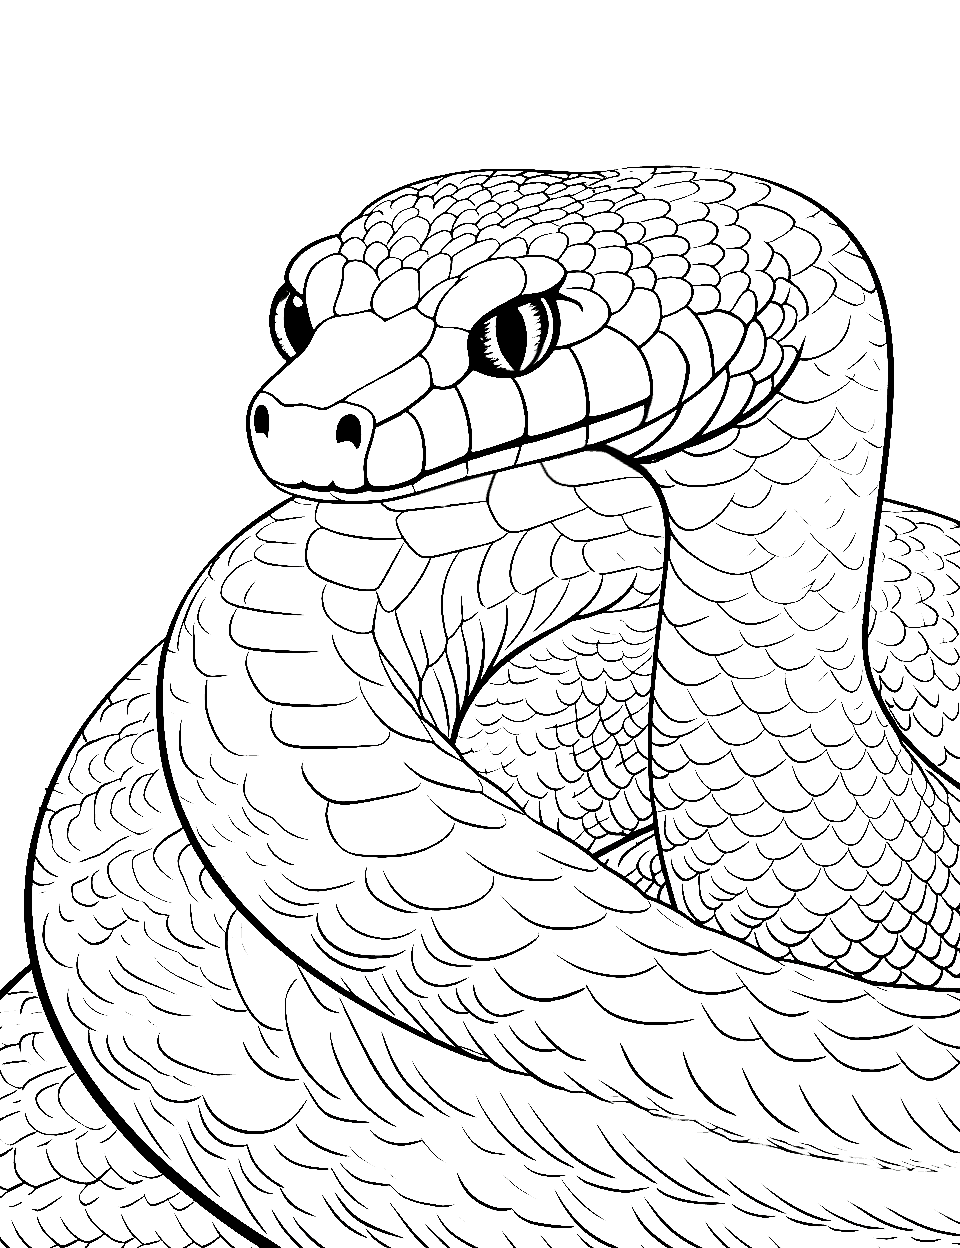 Curved Elegance Coloring Page - A gracefully curved snake with delicate scales.